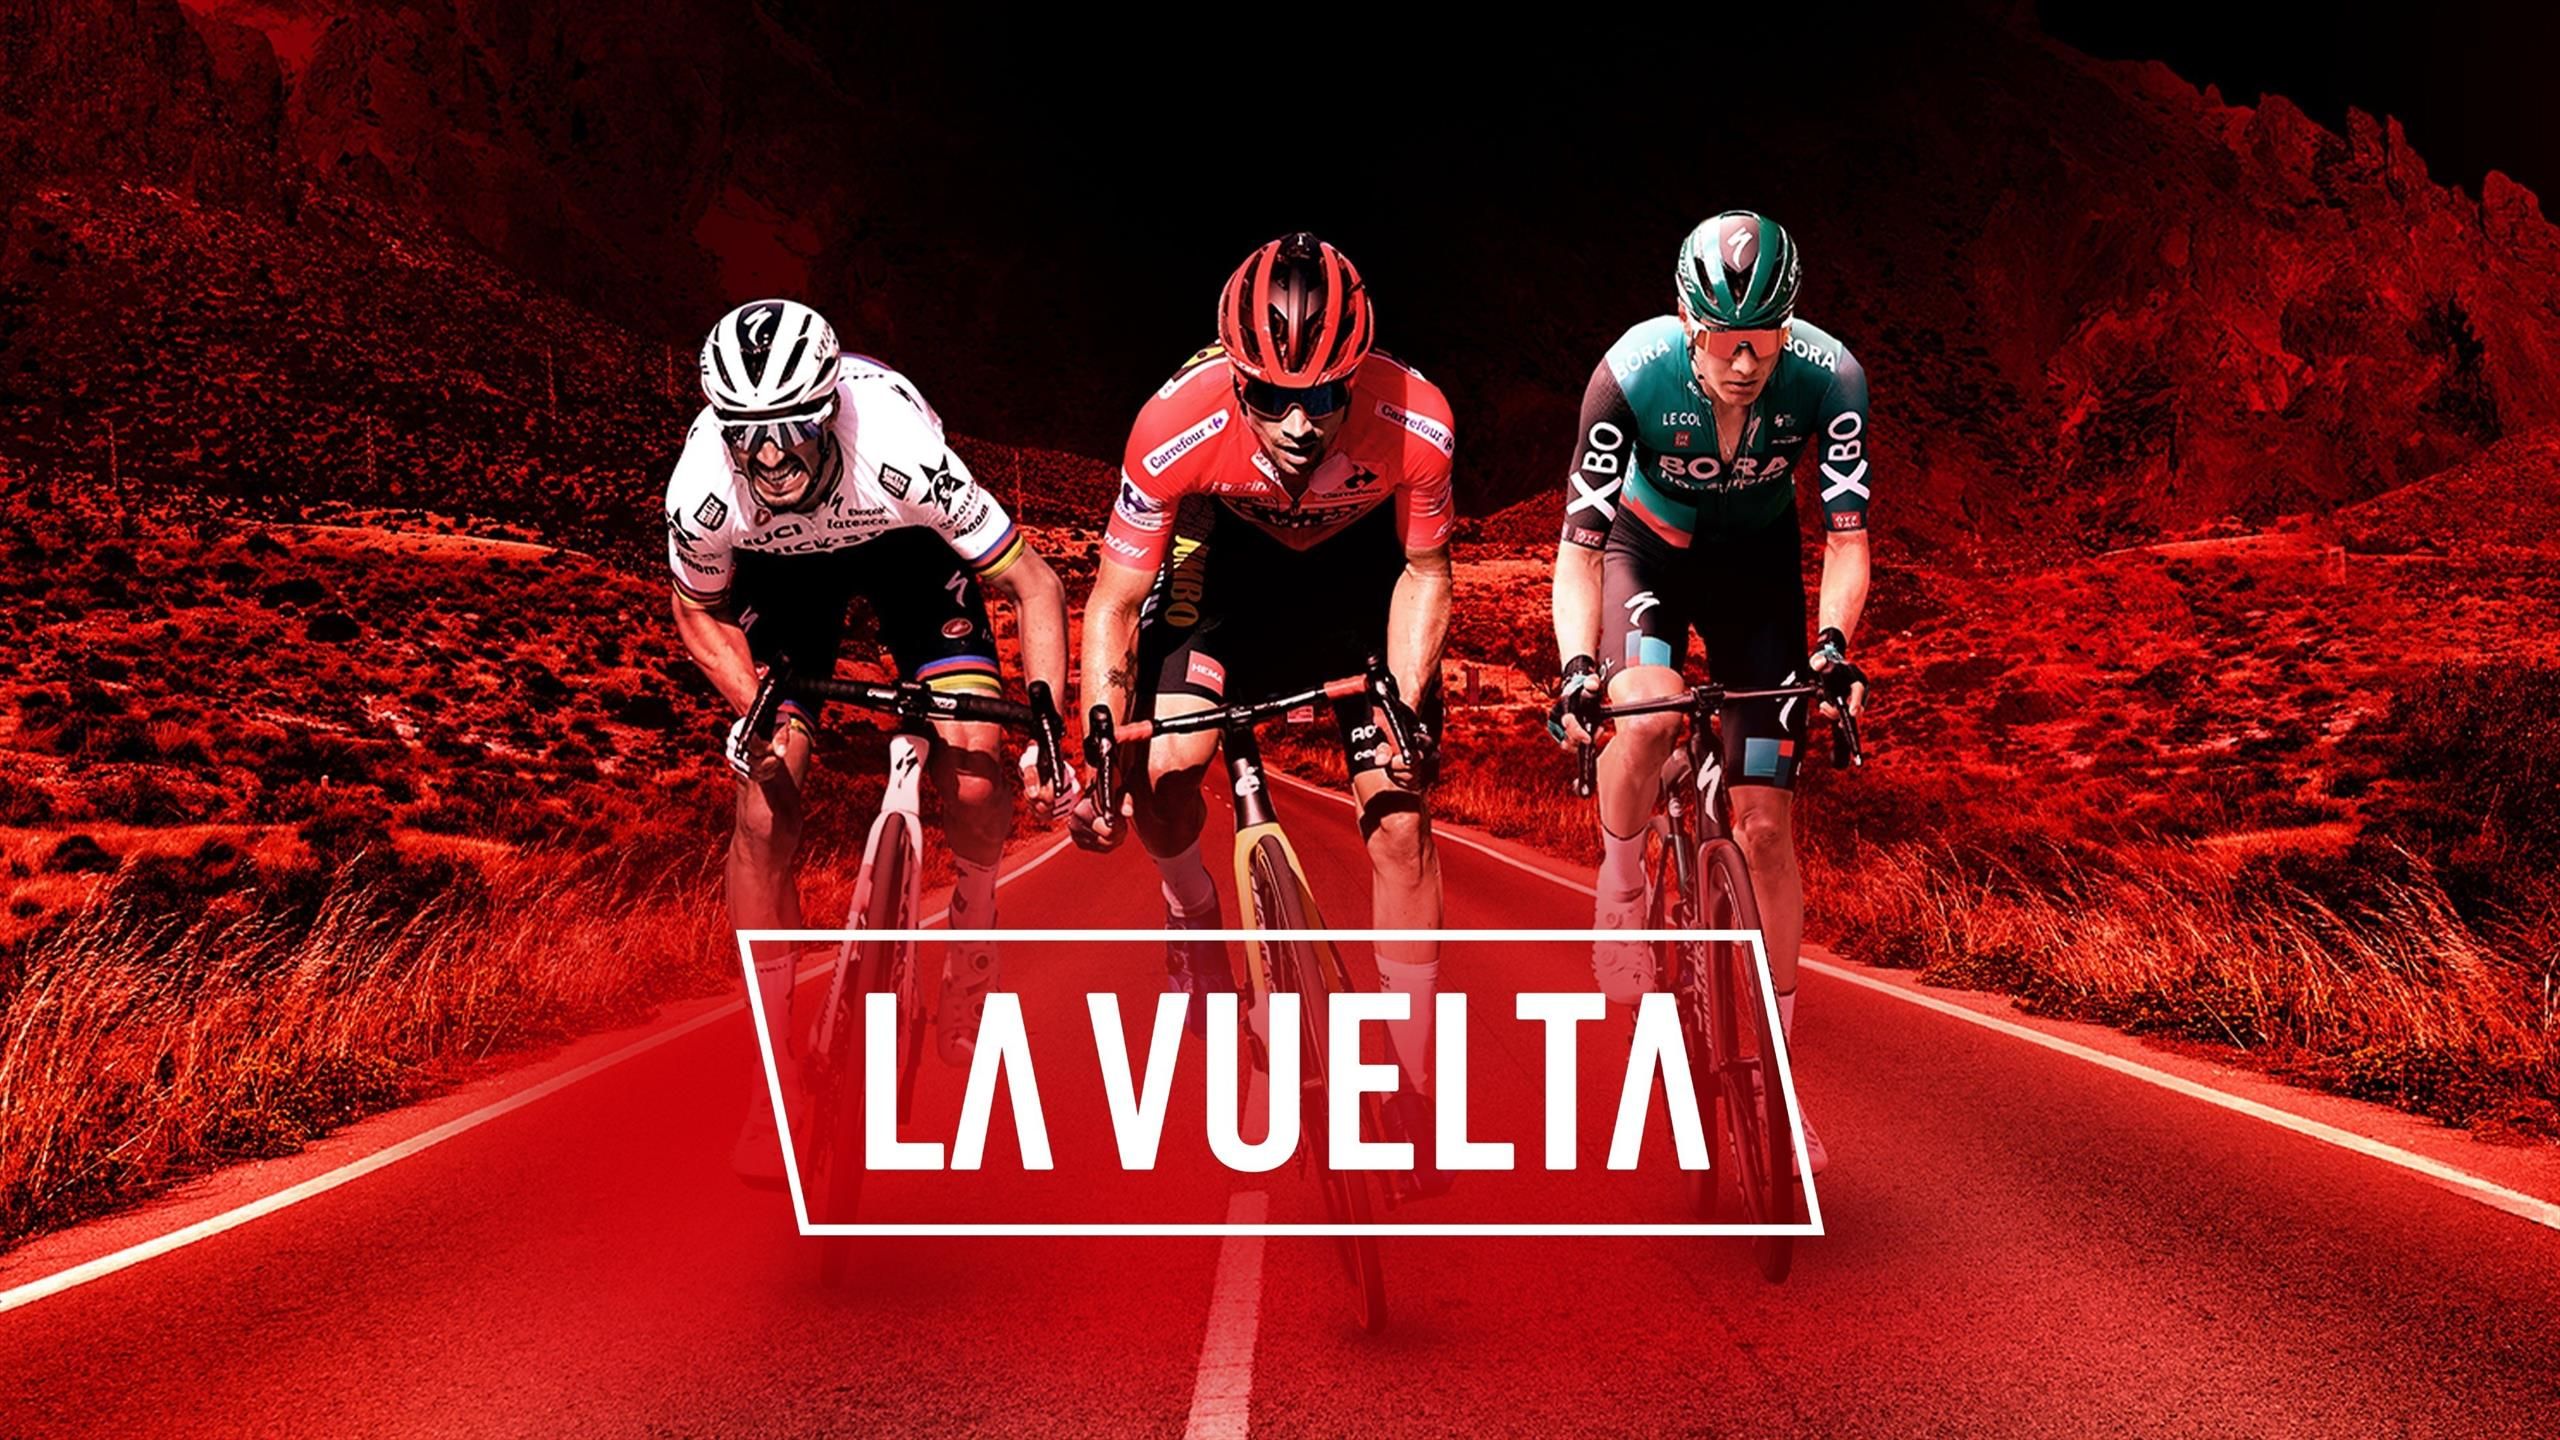 La Vuelta 2022 How to watch Spanish Grand Tour, TV and live stream details, dates and schedule